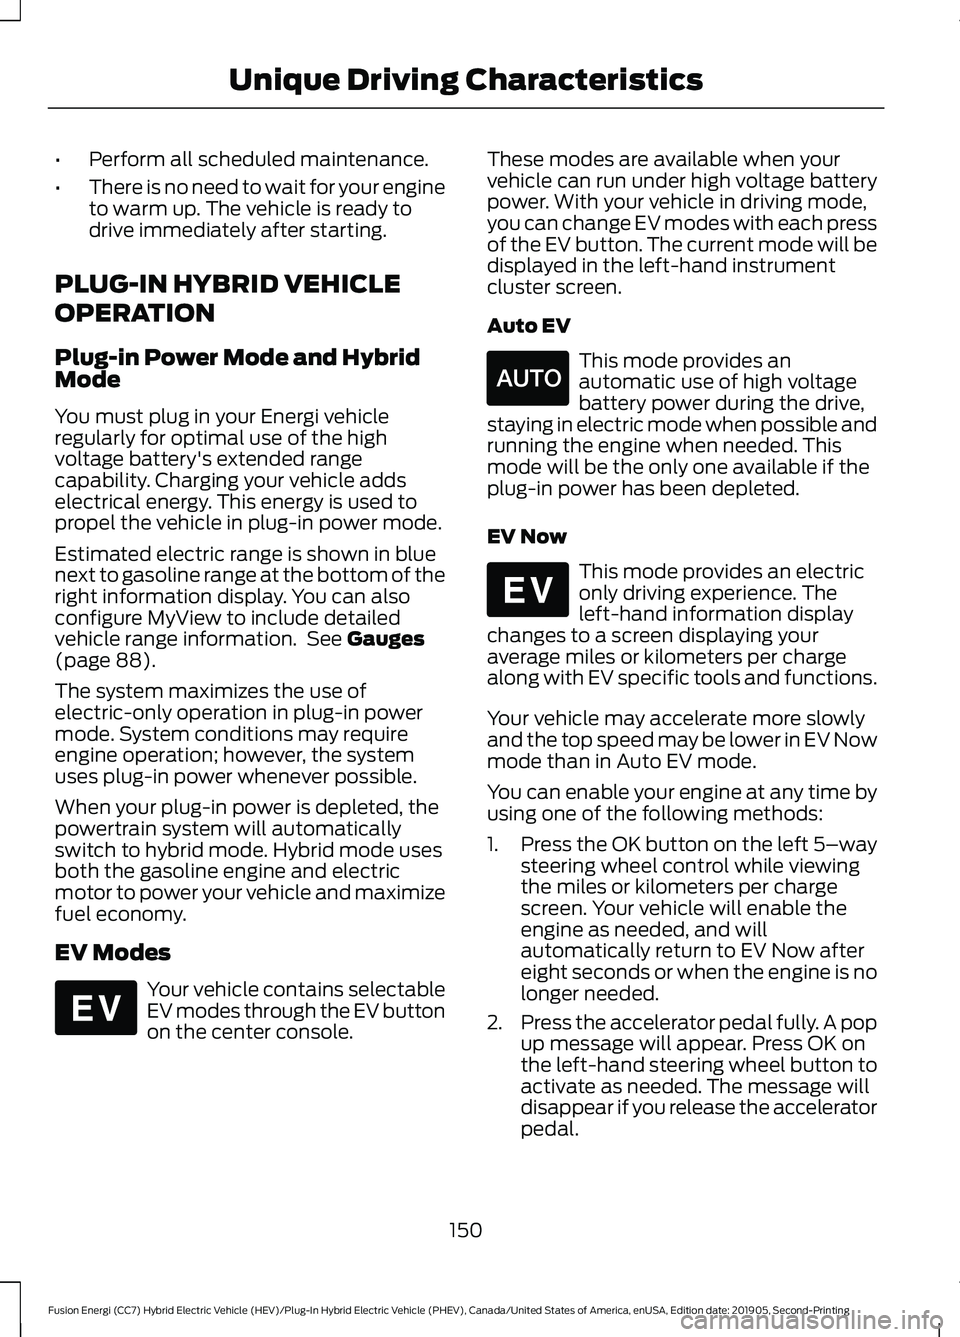 FORD FUSION/HYBRID 2020  Owners Manual •
Perform all scheduled maintenance.
• There is no need to wait for your engine
to warm up. The vehicle is ready to
drive immediately after starting.
PLUG-IN HYBRID VEHICLE
OPERATION
Plug-in Power